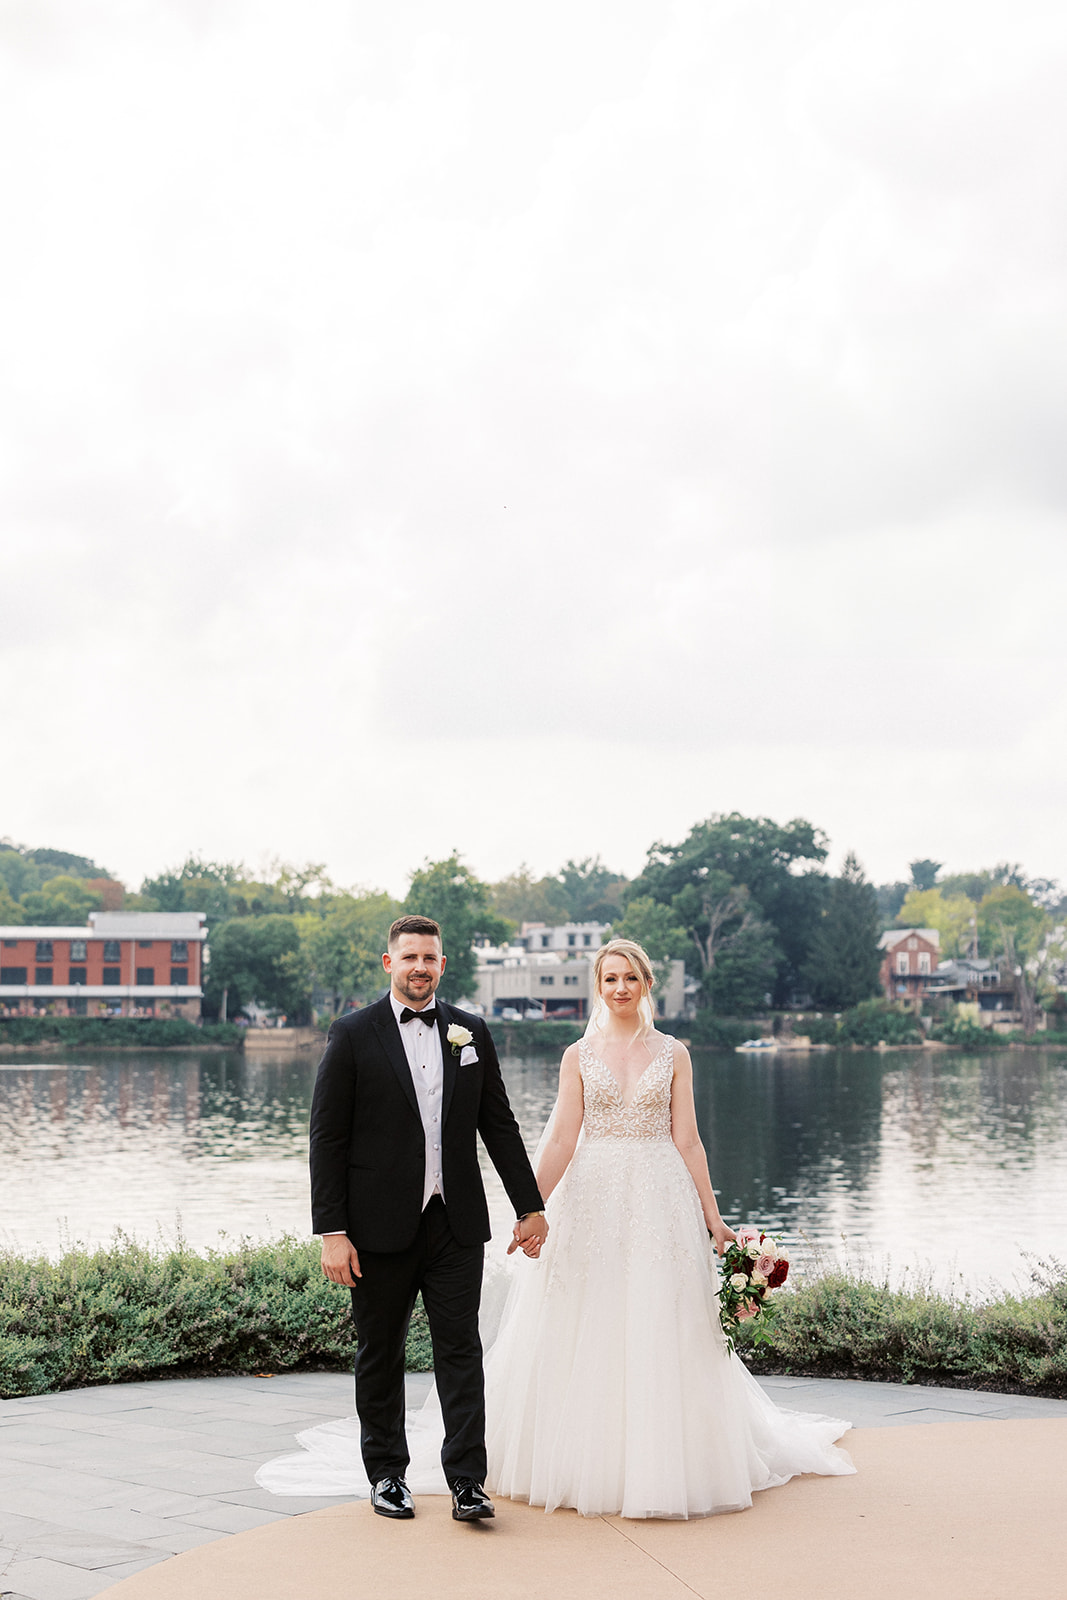 Newlyweds hold hands while walking through a riverfront garden patio